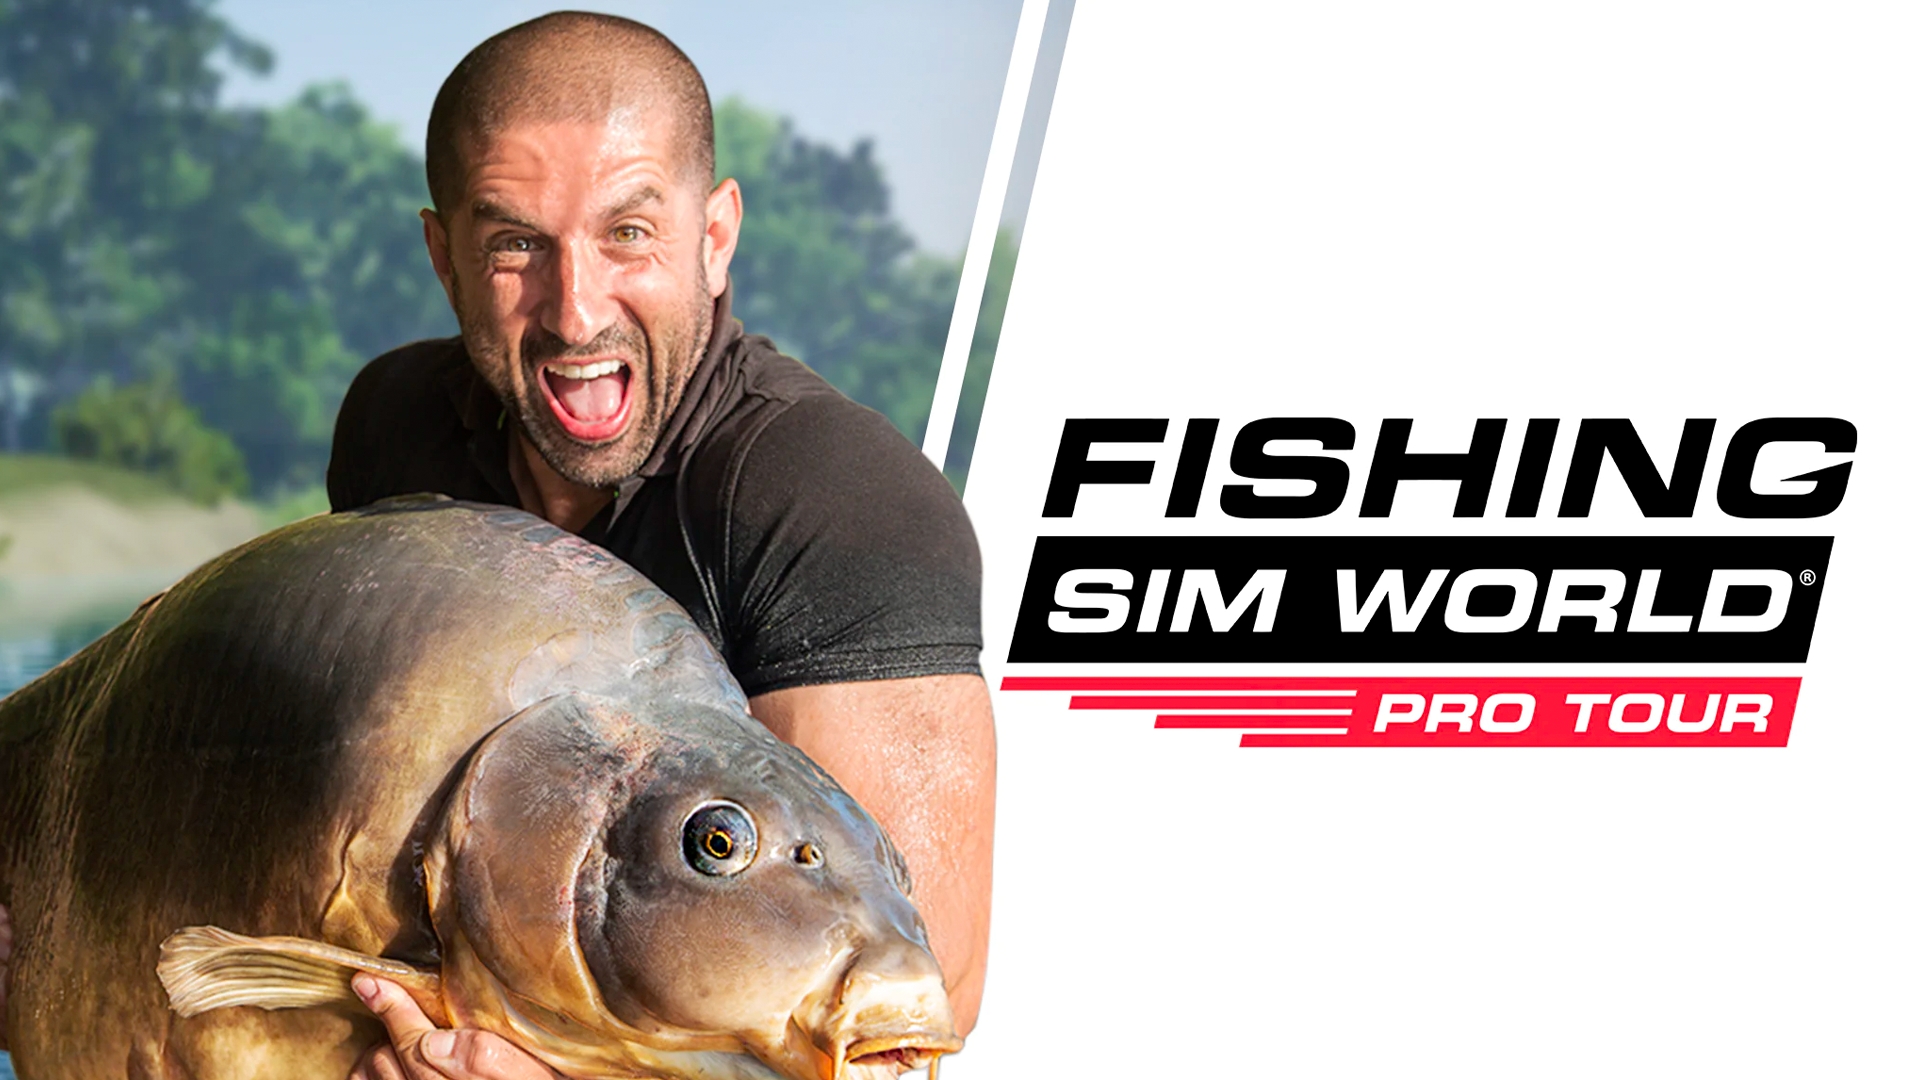 https://gaming-cdn.com/images/products/3124/orig/fishing-sim-world-pro-tour-pc-game-steam-cover.jpg?v=1705405657